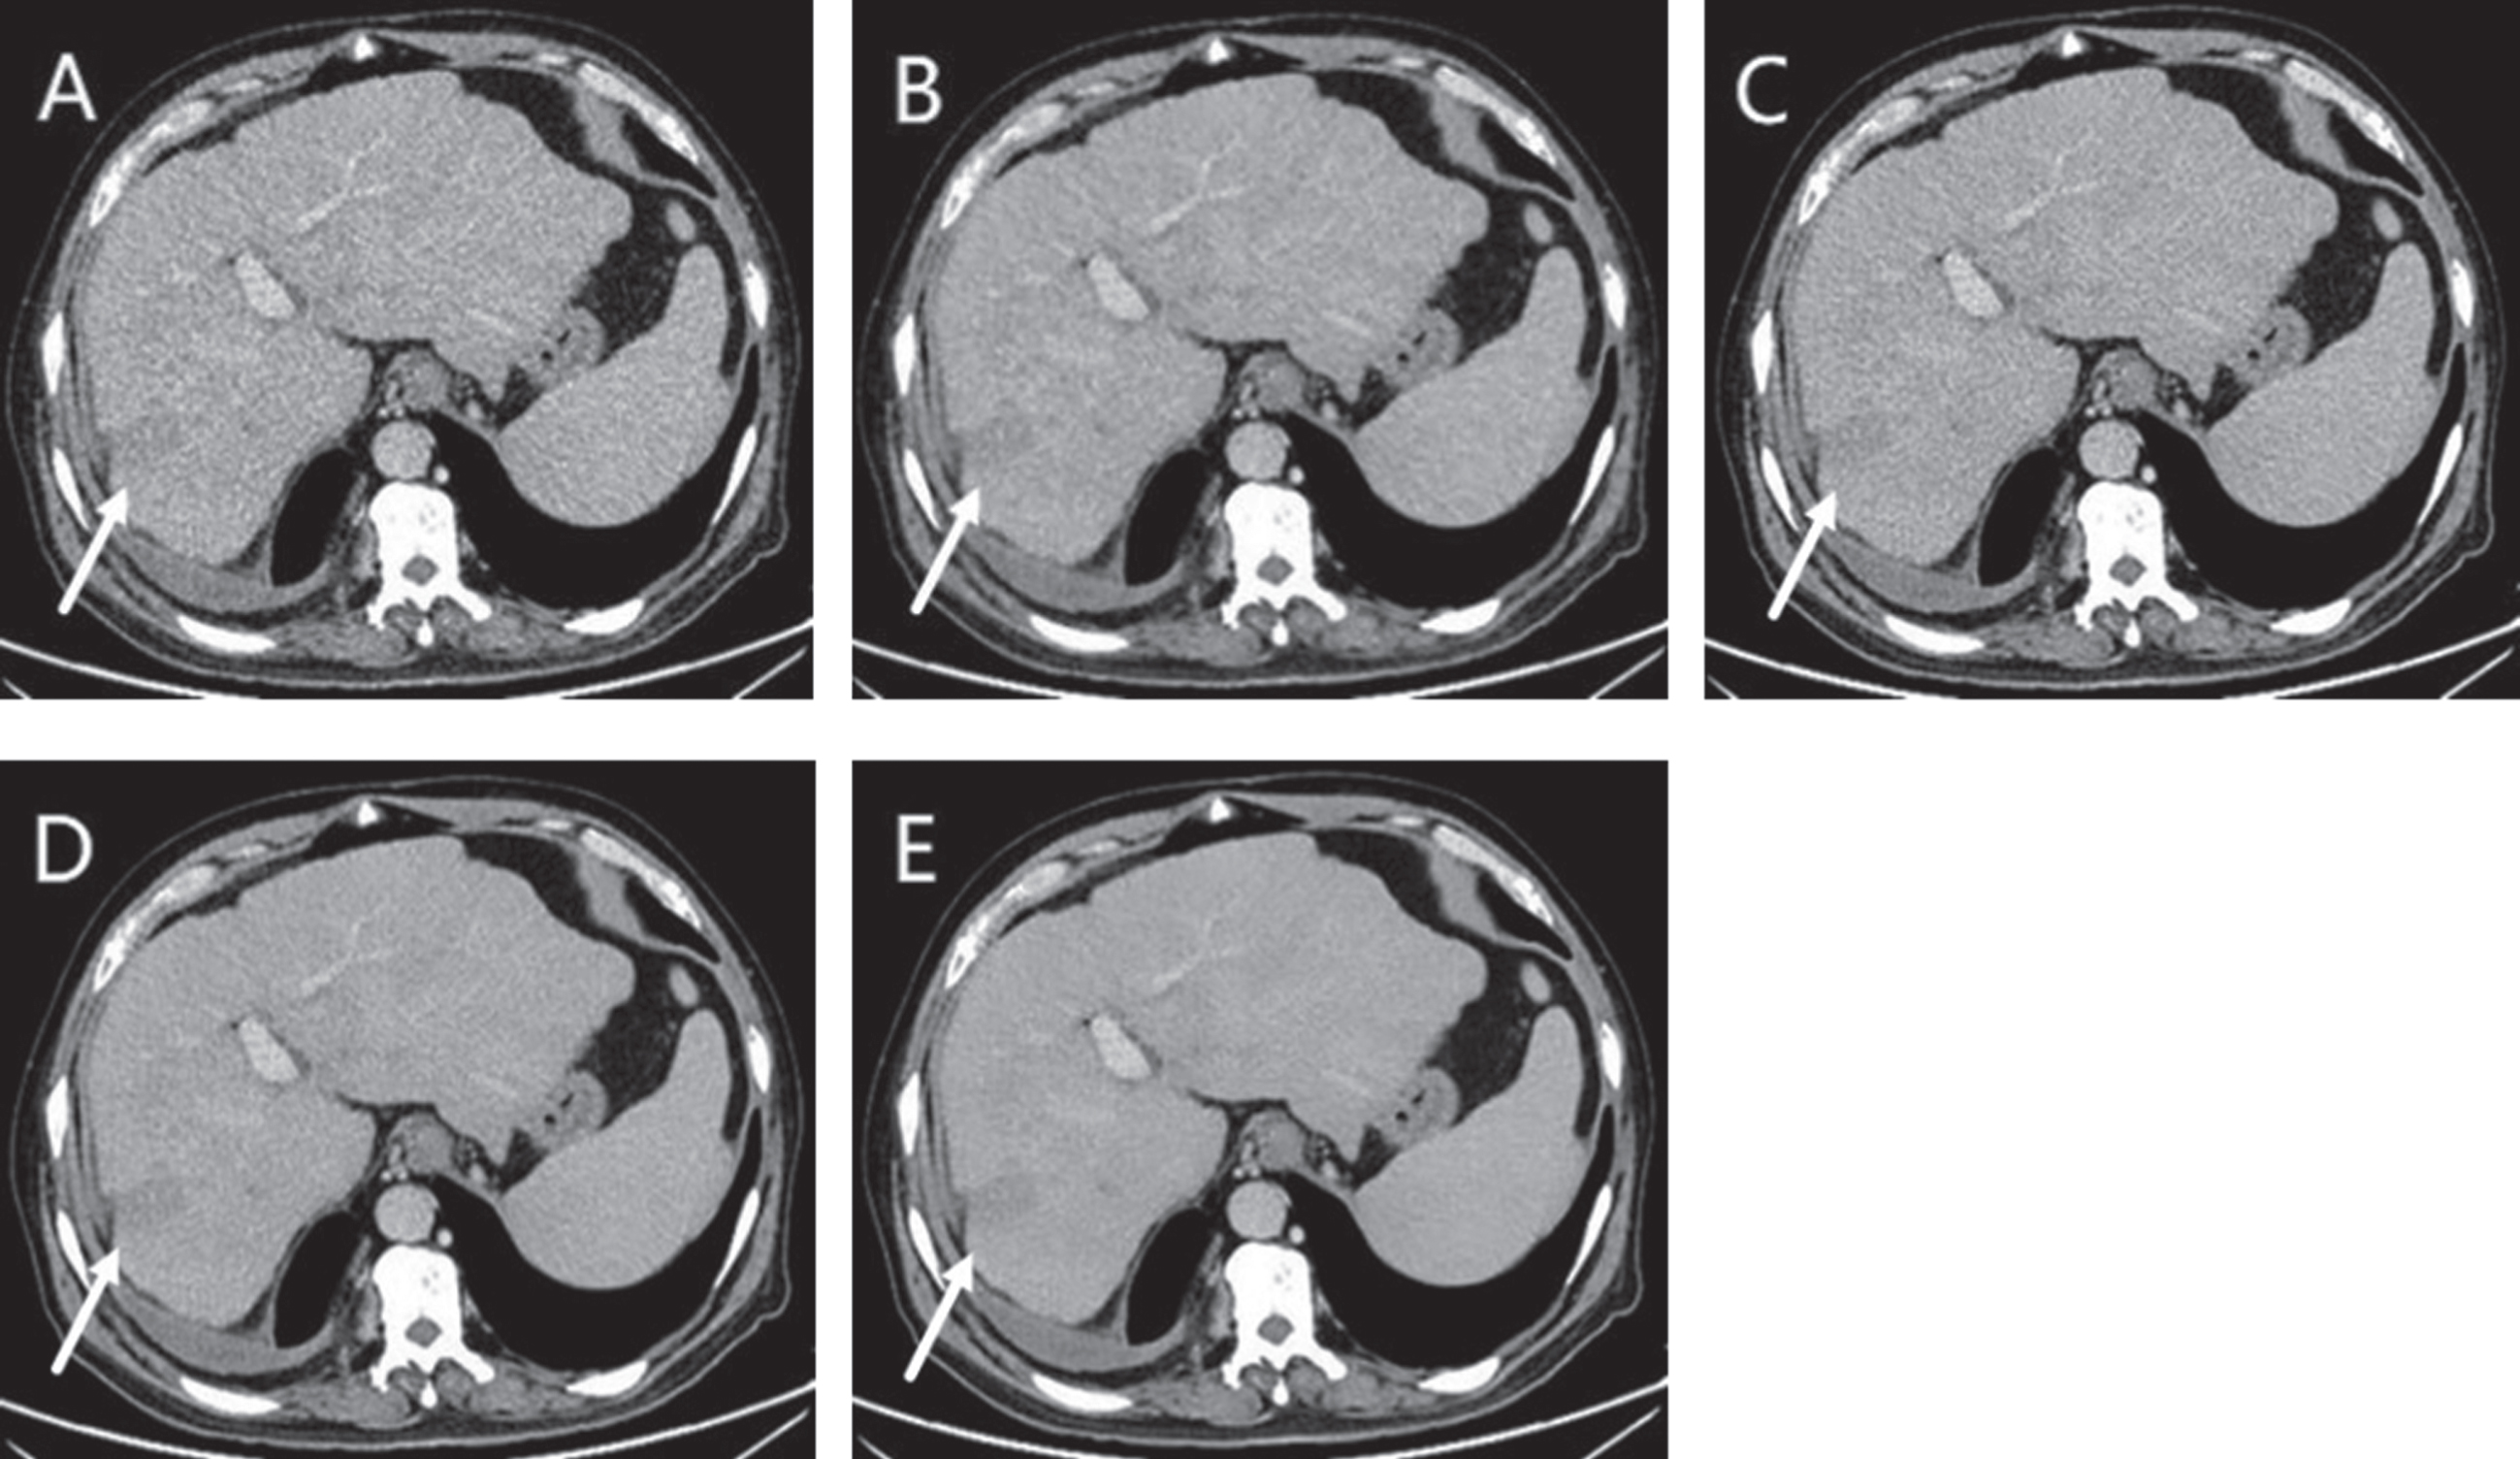 A 65-year-old male with liver metastases with weakly enhancement (arrows) showed on ASIR-V 30 (AV-30) (A), ASIR-V 70 (AV-70) (B), DLIR-low (DL-L) (C), DLIR-medium (DL-M) (D), DLIR-high (DL-H) (E). DL-M and DL-H provided better visual image quality, which was mainly due to lower image noise. DL-M even had better lesion-clarity than DL-H because of the blurring observed in DLIR-high reconstructions.